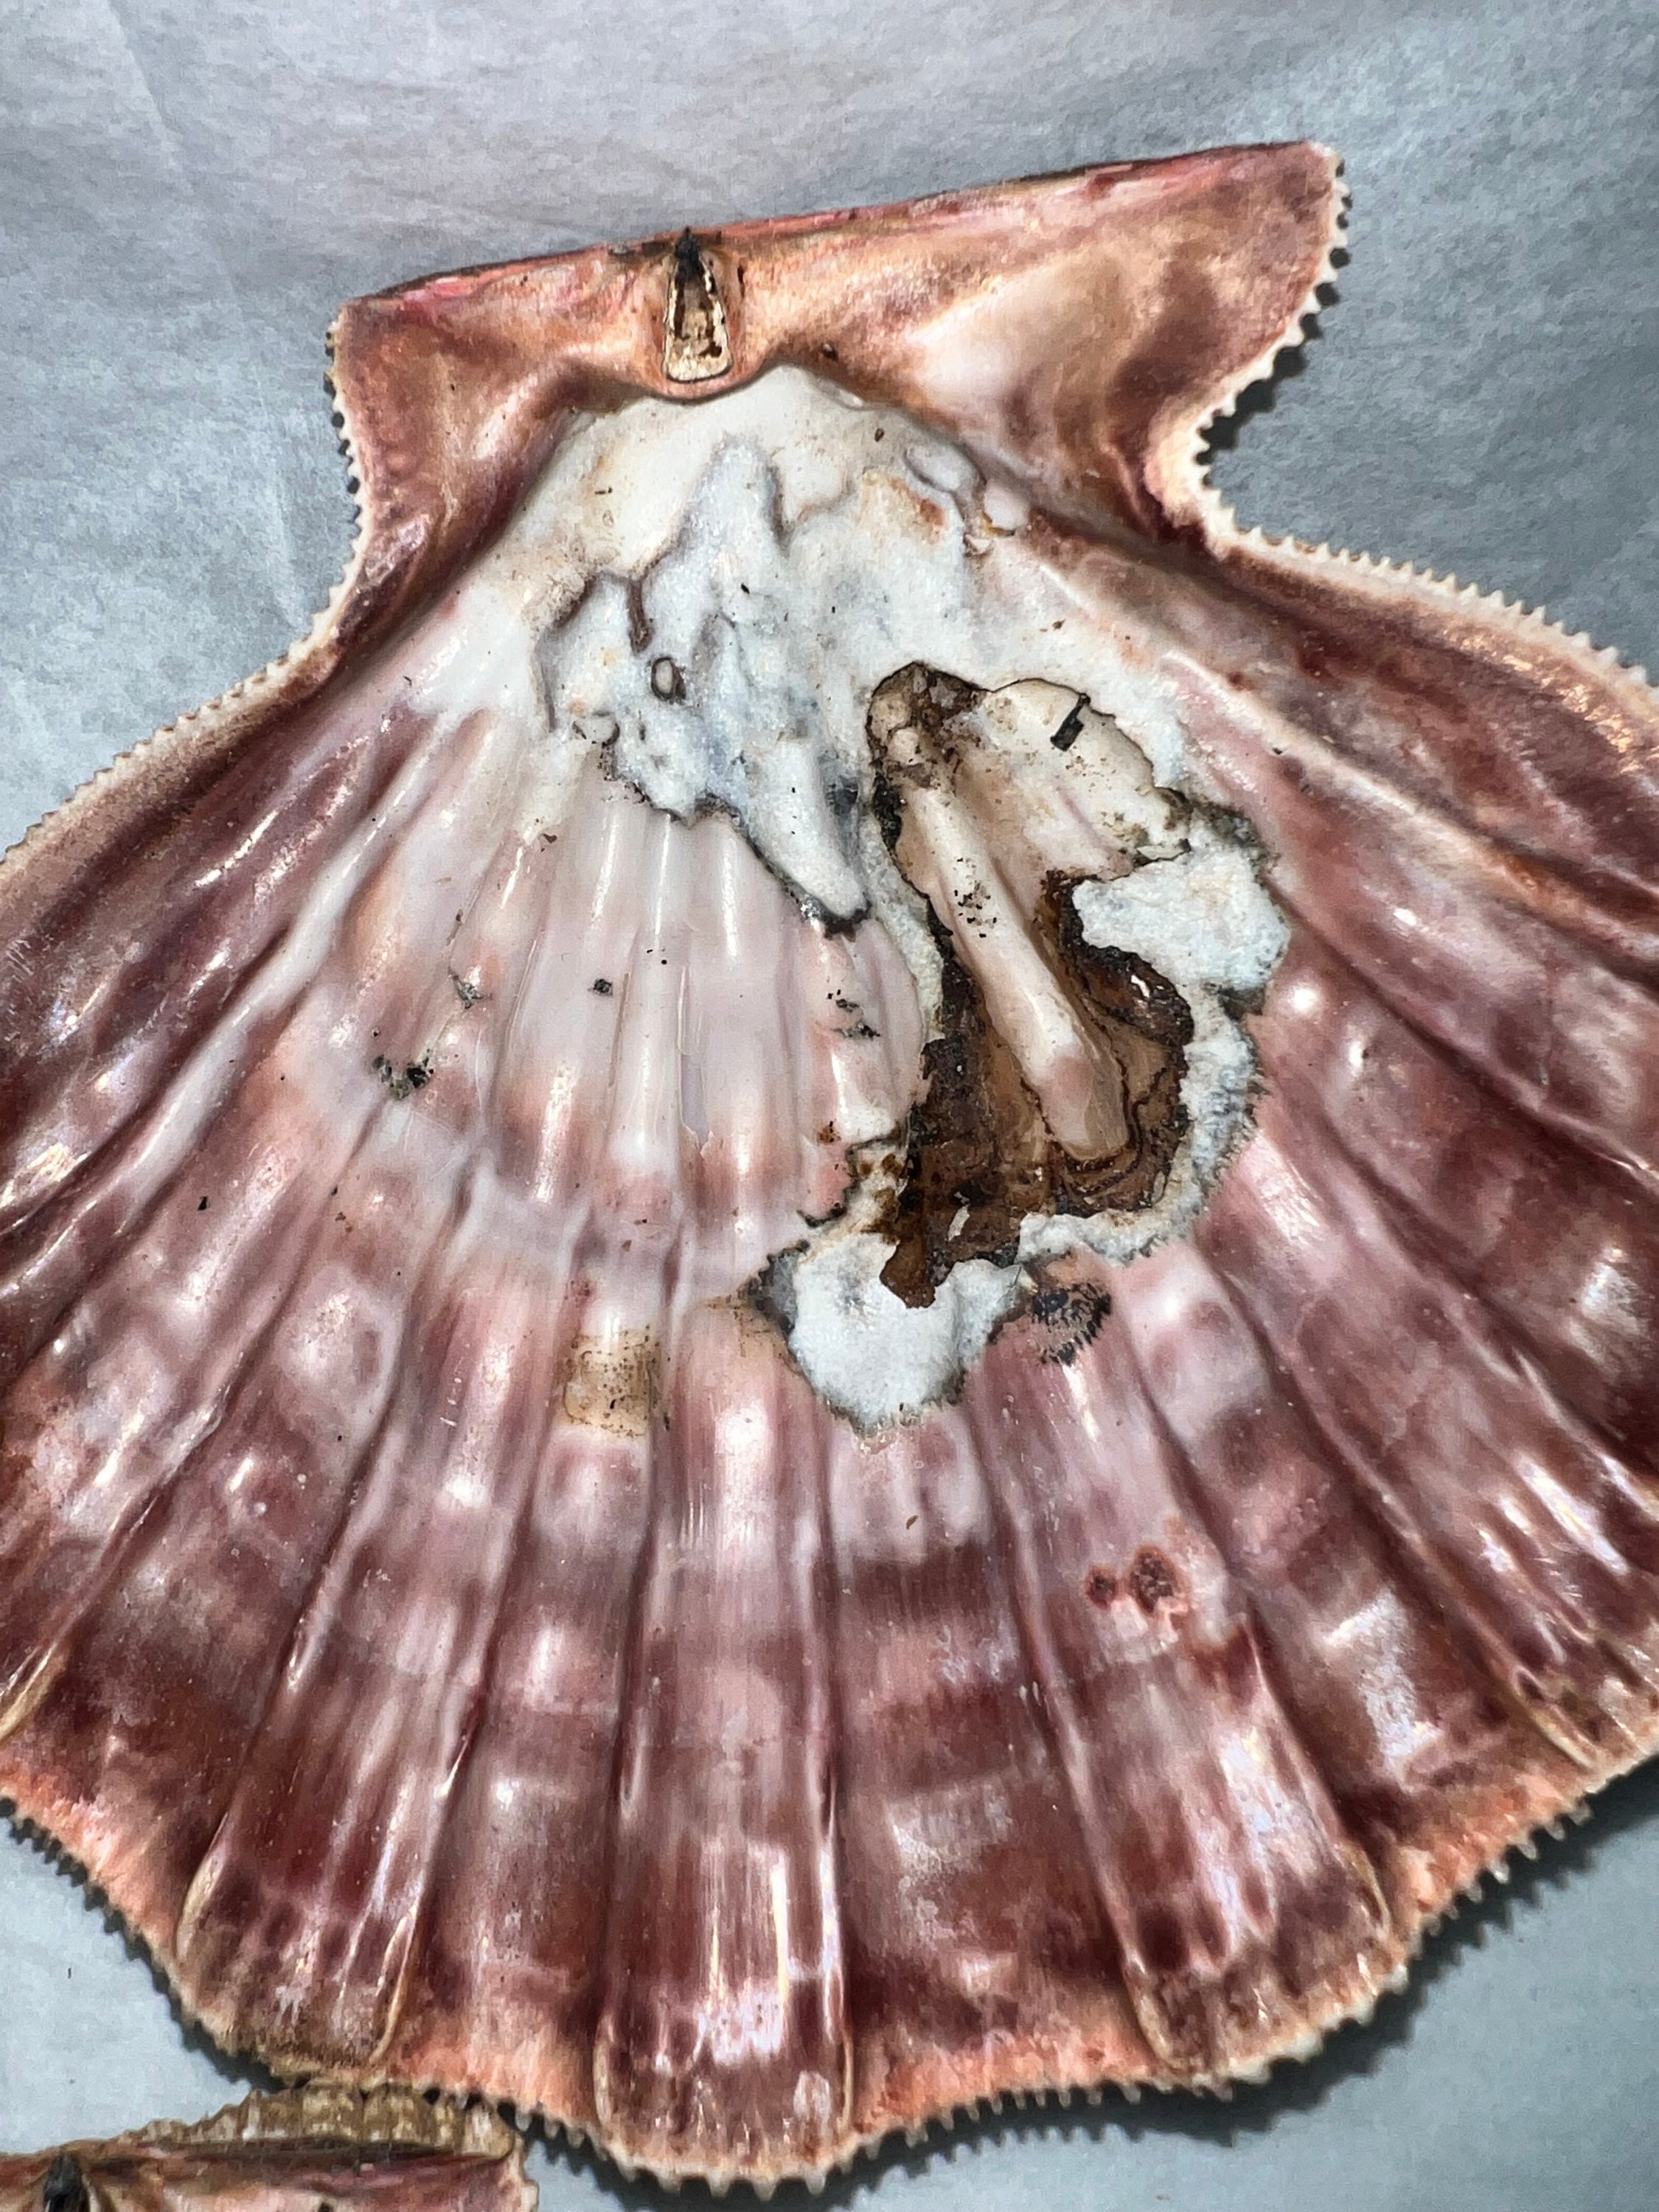 4 Pcs Polished Large Great Scallop Sea Shells 5~6 Inch,Brown Lion's Paw  Baking Shells,Ocean Beach Seashells Perfect for Home Decoration, Art Craft